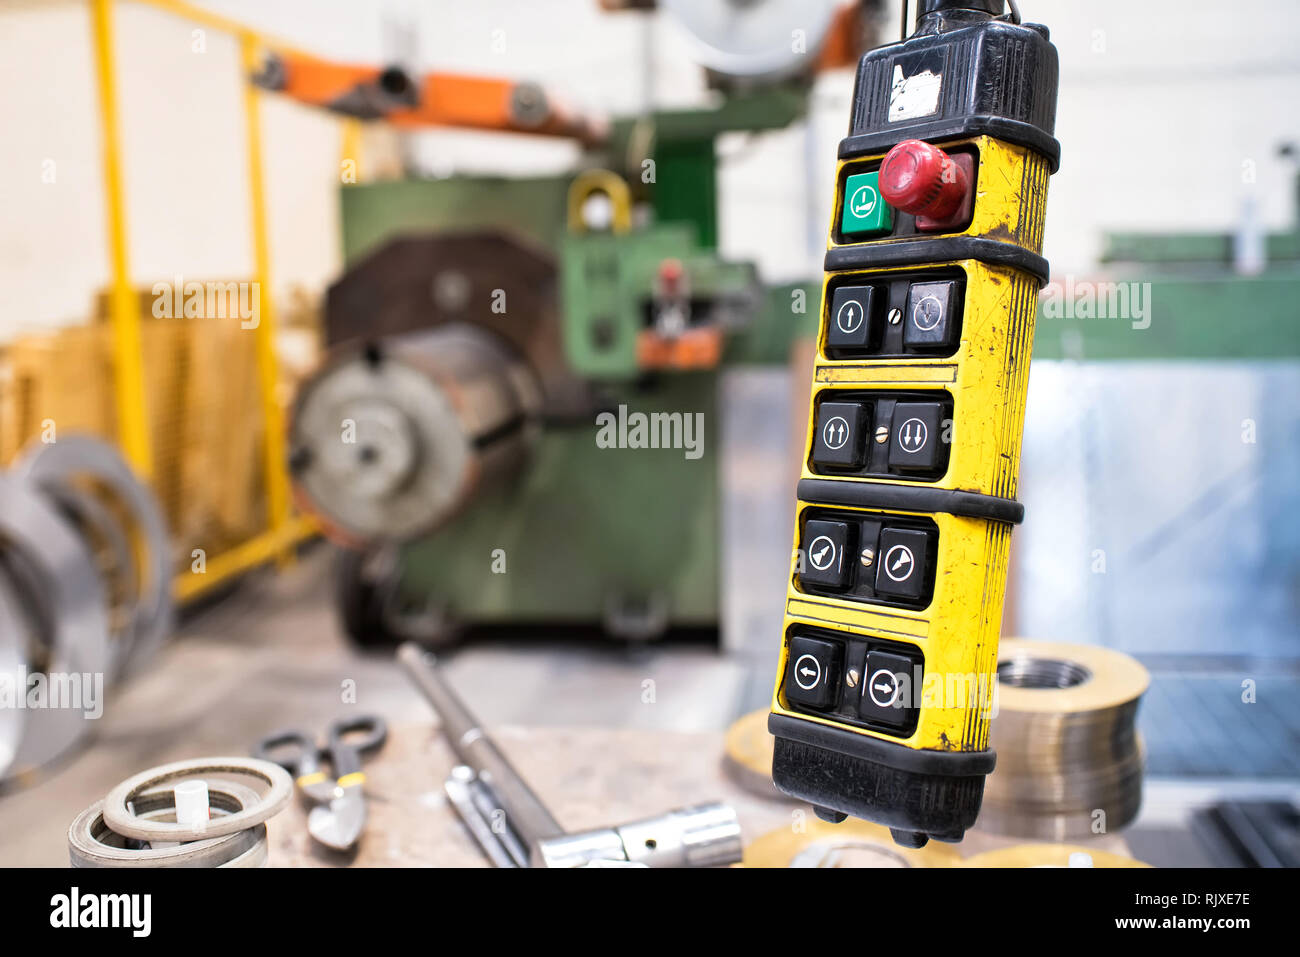 Crane remote control buttons in yellow case on wire. Lathe machine is blurred in background Stock Photo